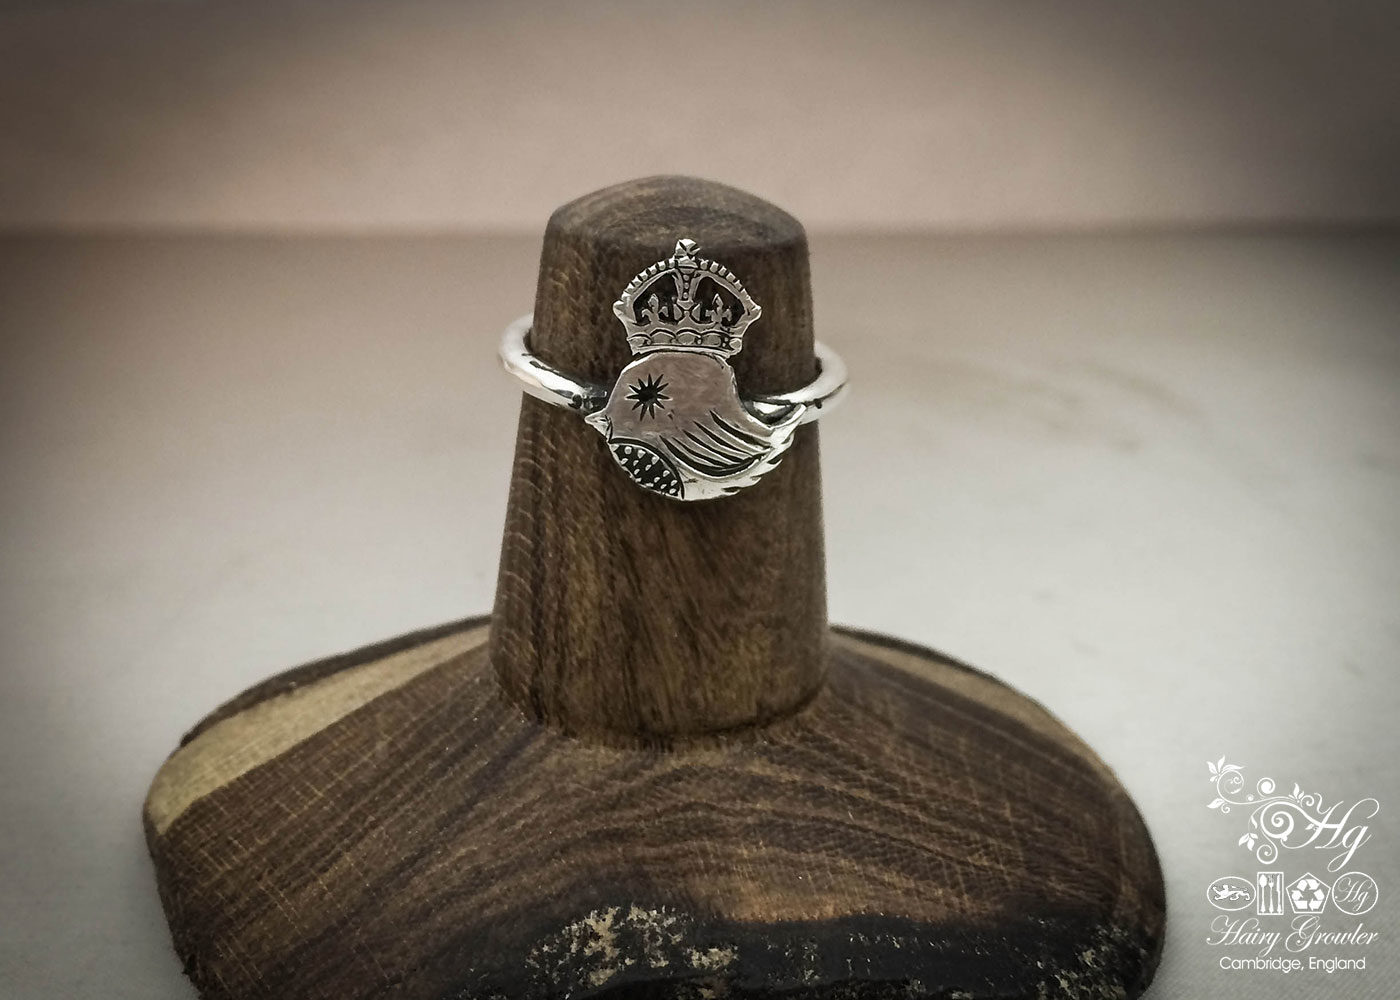 The 'teeny weeny bird queen' recycled silver threepence coin ring. Handmade and upcycled silver bird ring